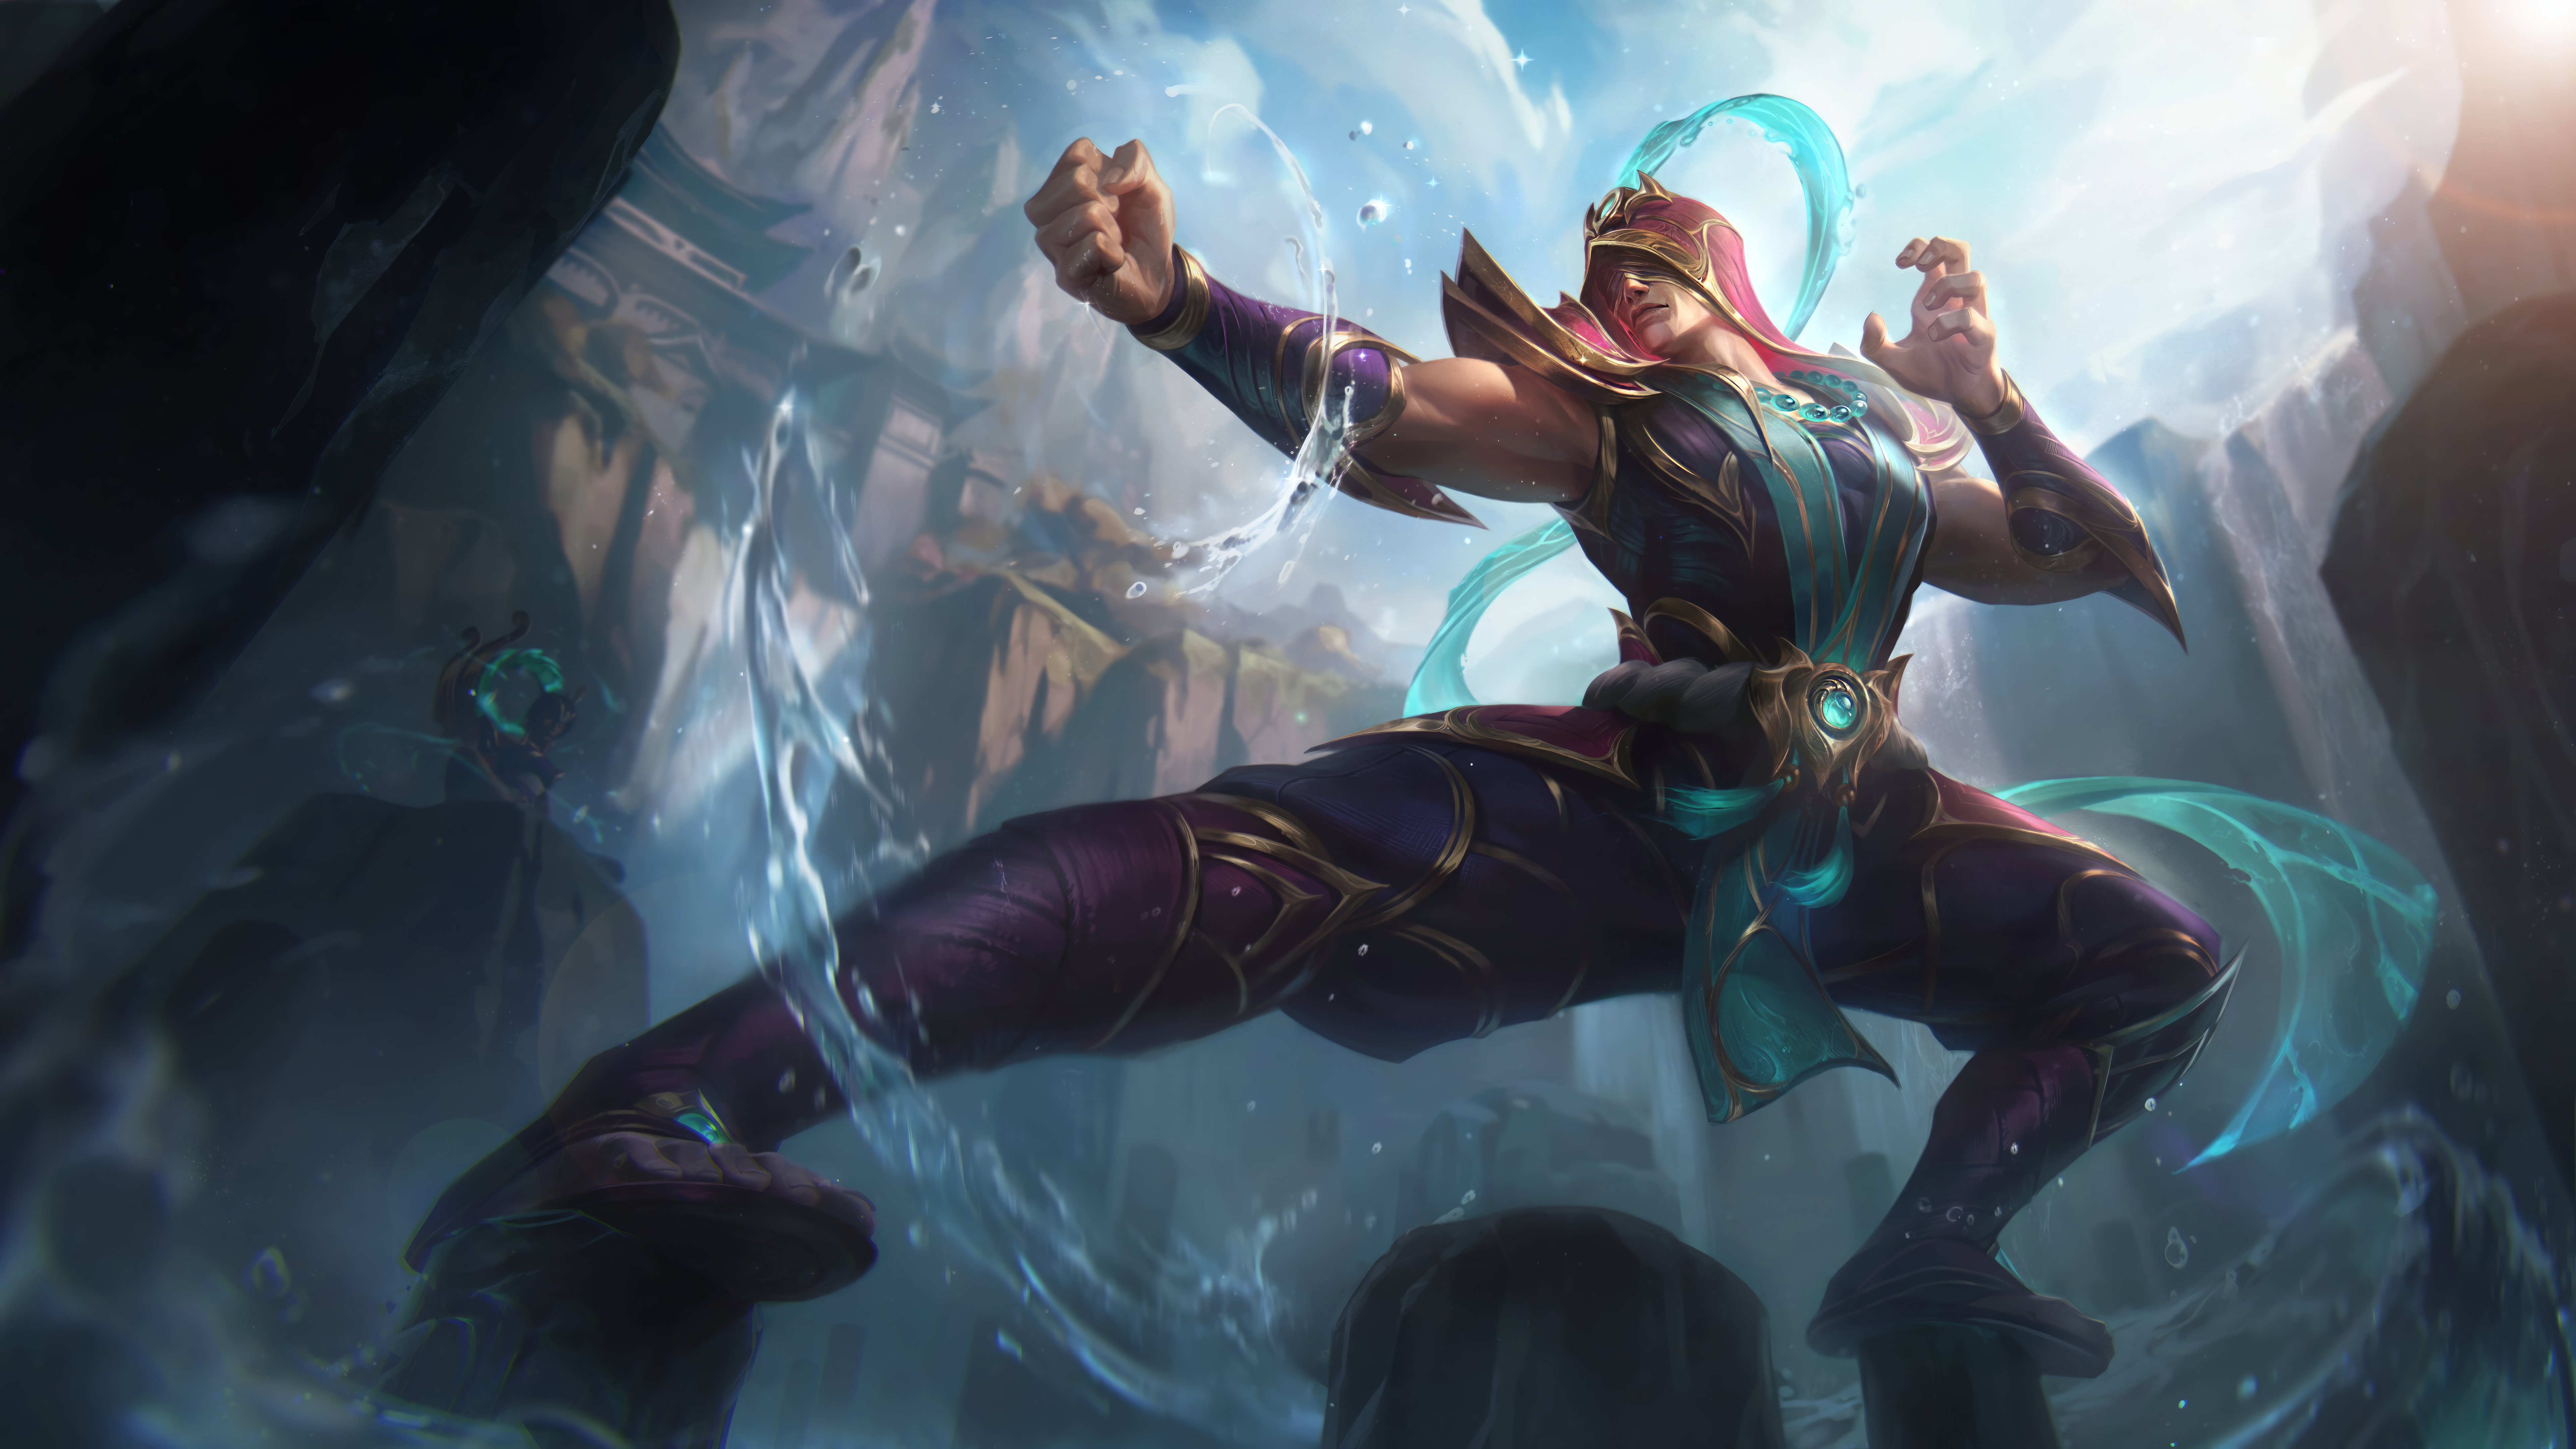 General 7680x4320 League of Legends digital art Riot Games GZG video games Lee Sin (League of Legends) video game characters 4K video game men muscles fighting stance water sunlight covered eye(s) sky clouds tassels video game art fist spread legs waterfall